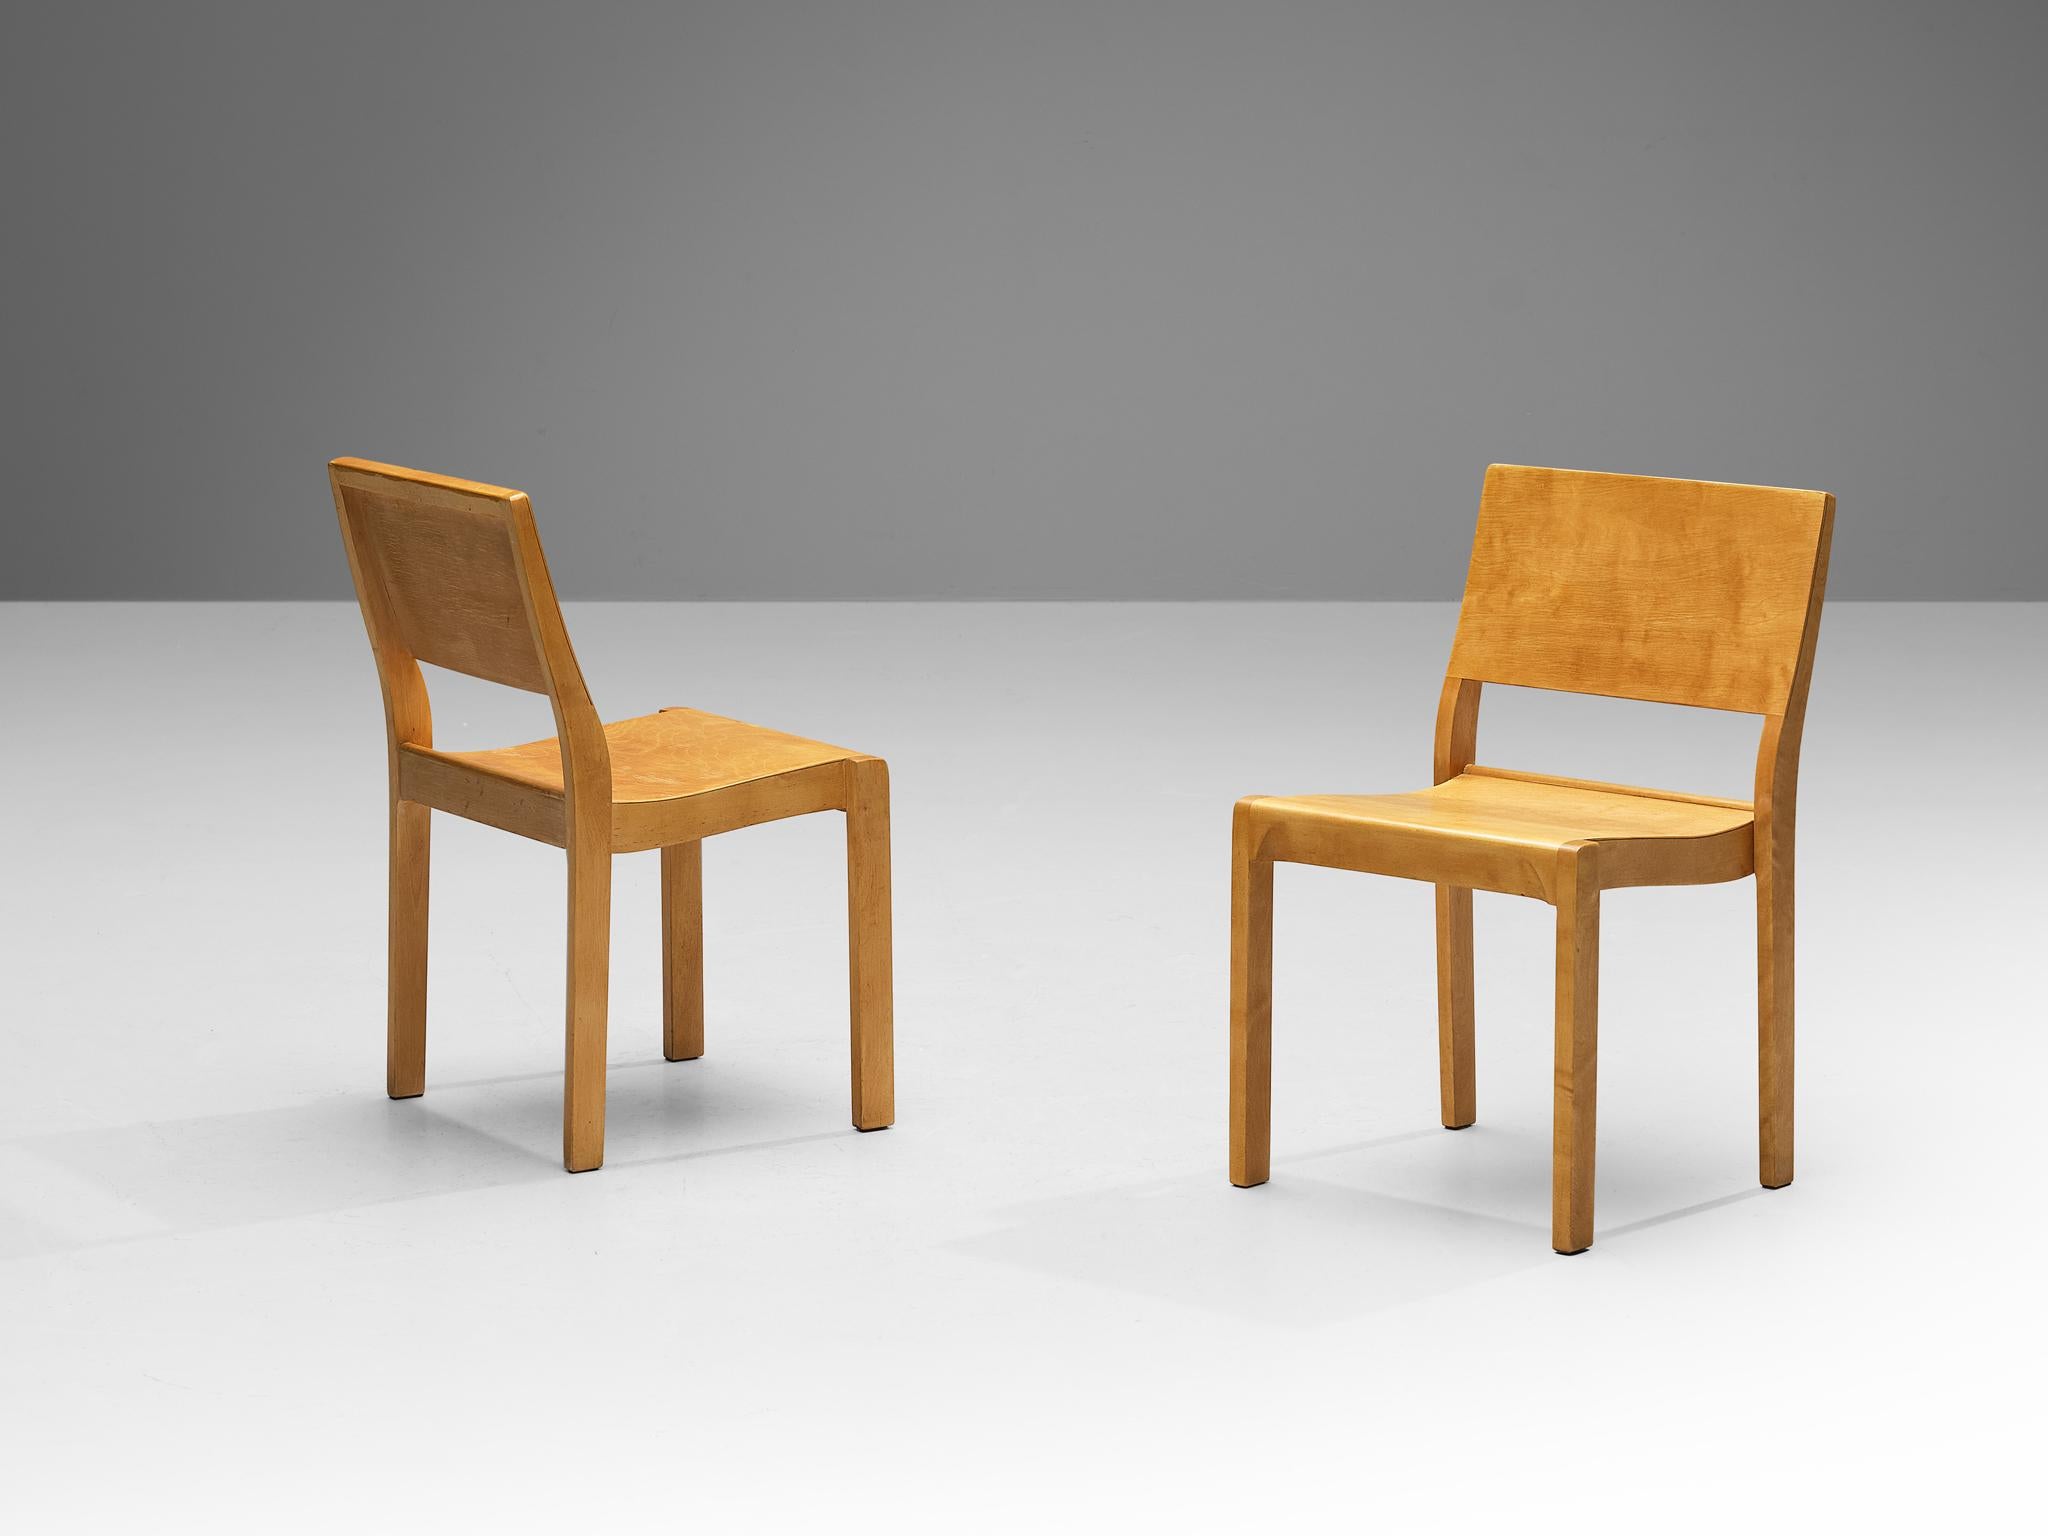 Alvar Aalto for Artek, dining chairs, model '11', birch, plywood, Finland, design 1929

Lovely pair of stackable chairs designed by Alvar Aalto in 1929. This set is manufactured by Artek Finland. These chairs are made in a fresh and natural birch